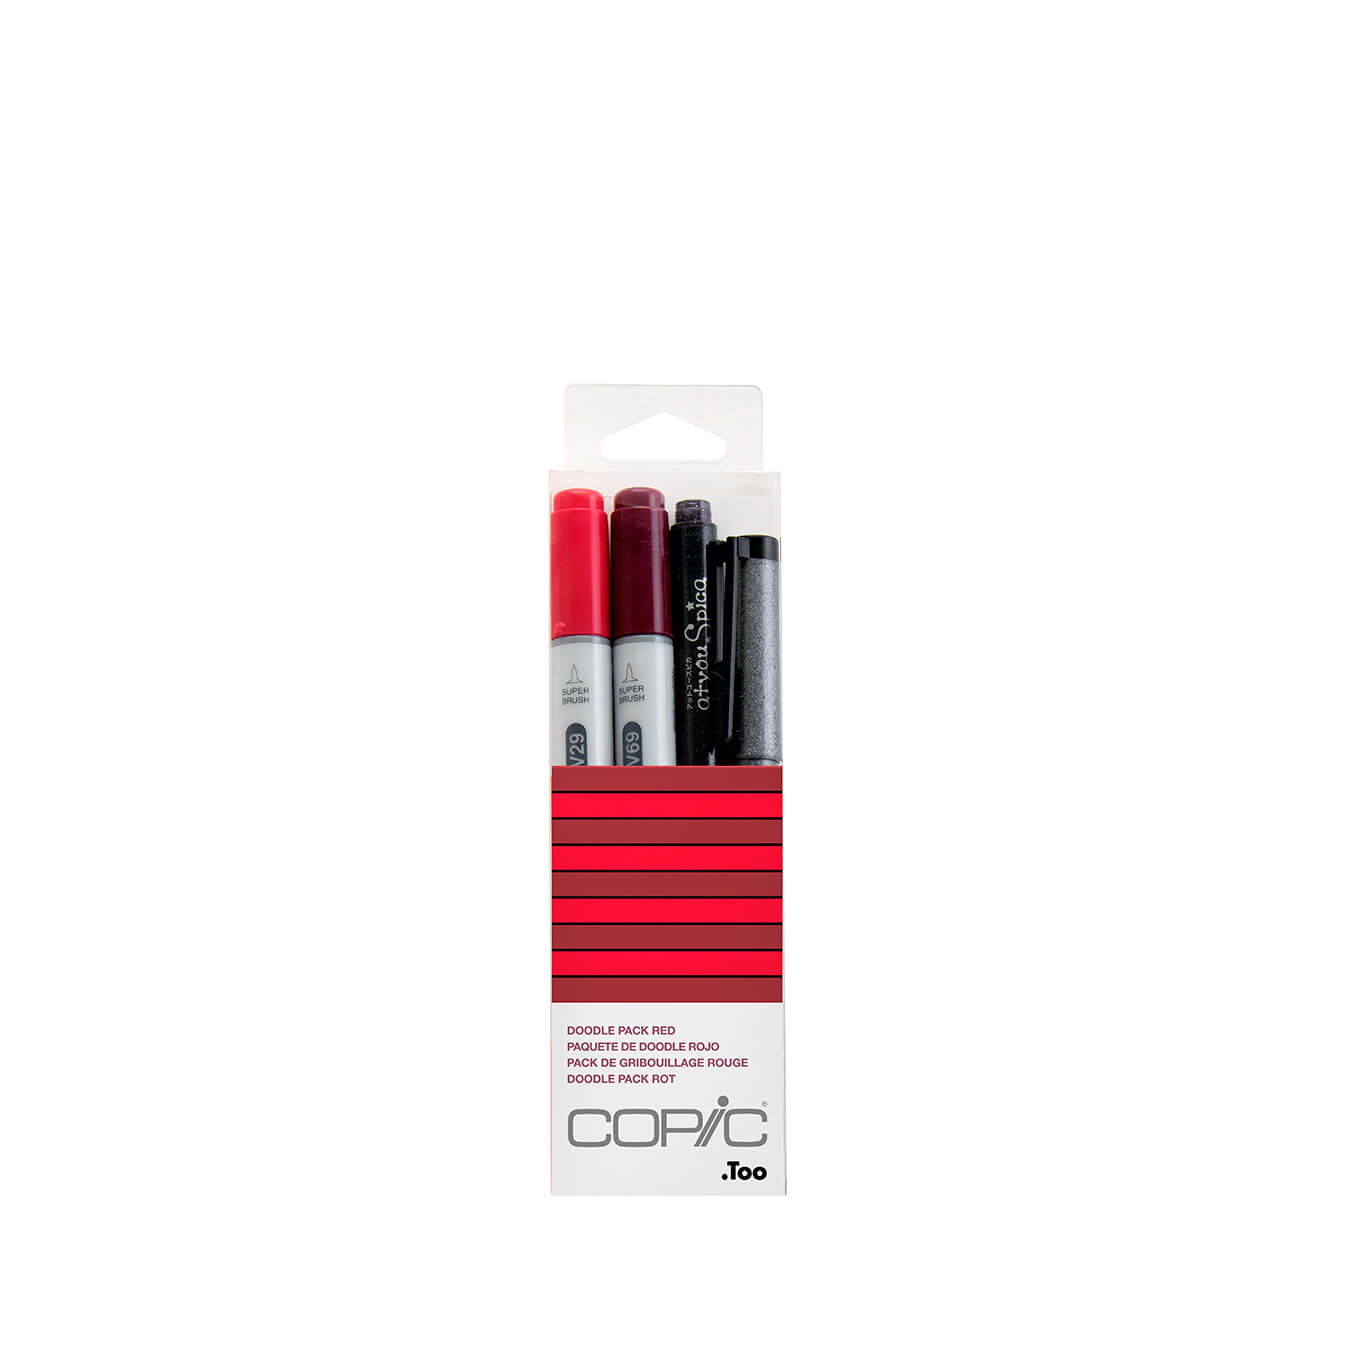 Copic Ciao Doodle pack Red